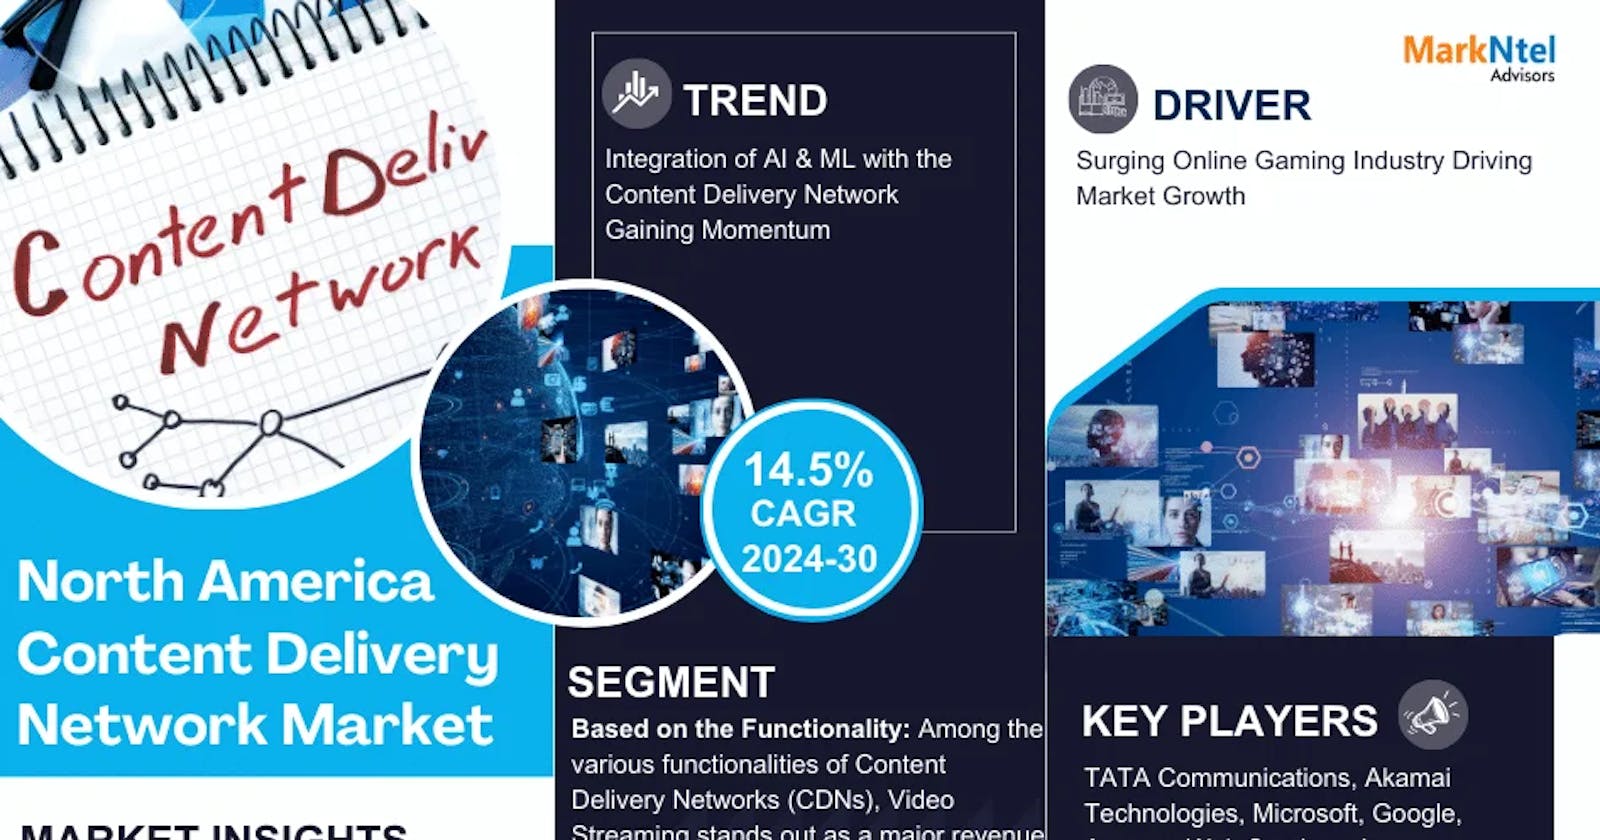 North America Content Delivery Network Market Trends: Analysis of 14.5% CAGR Growth (2024-30)